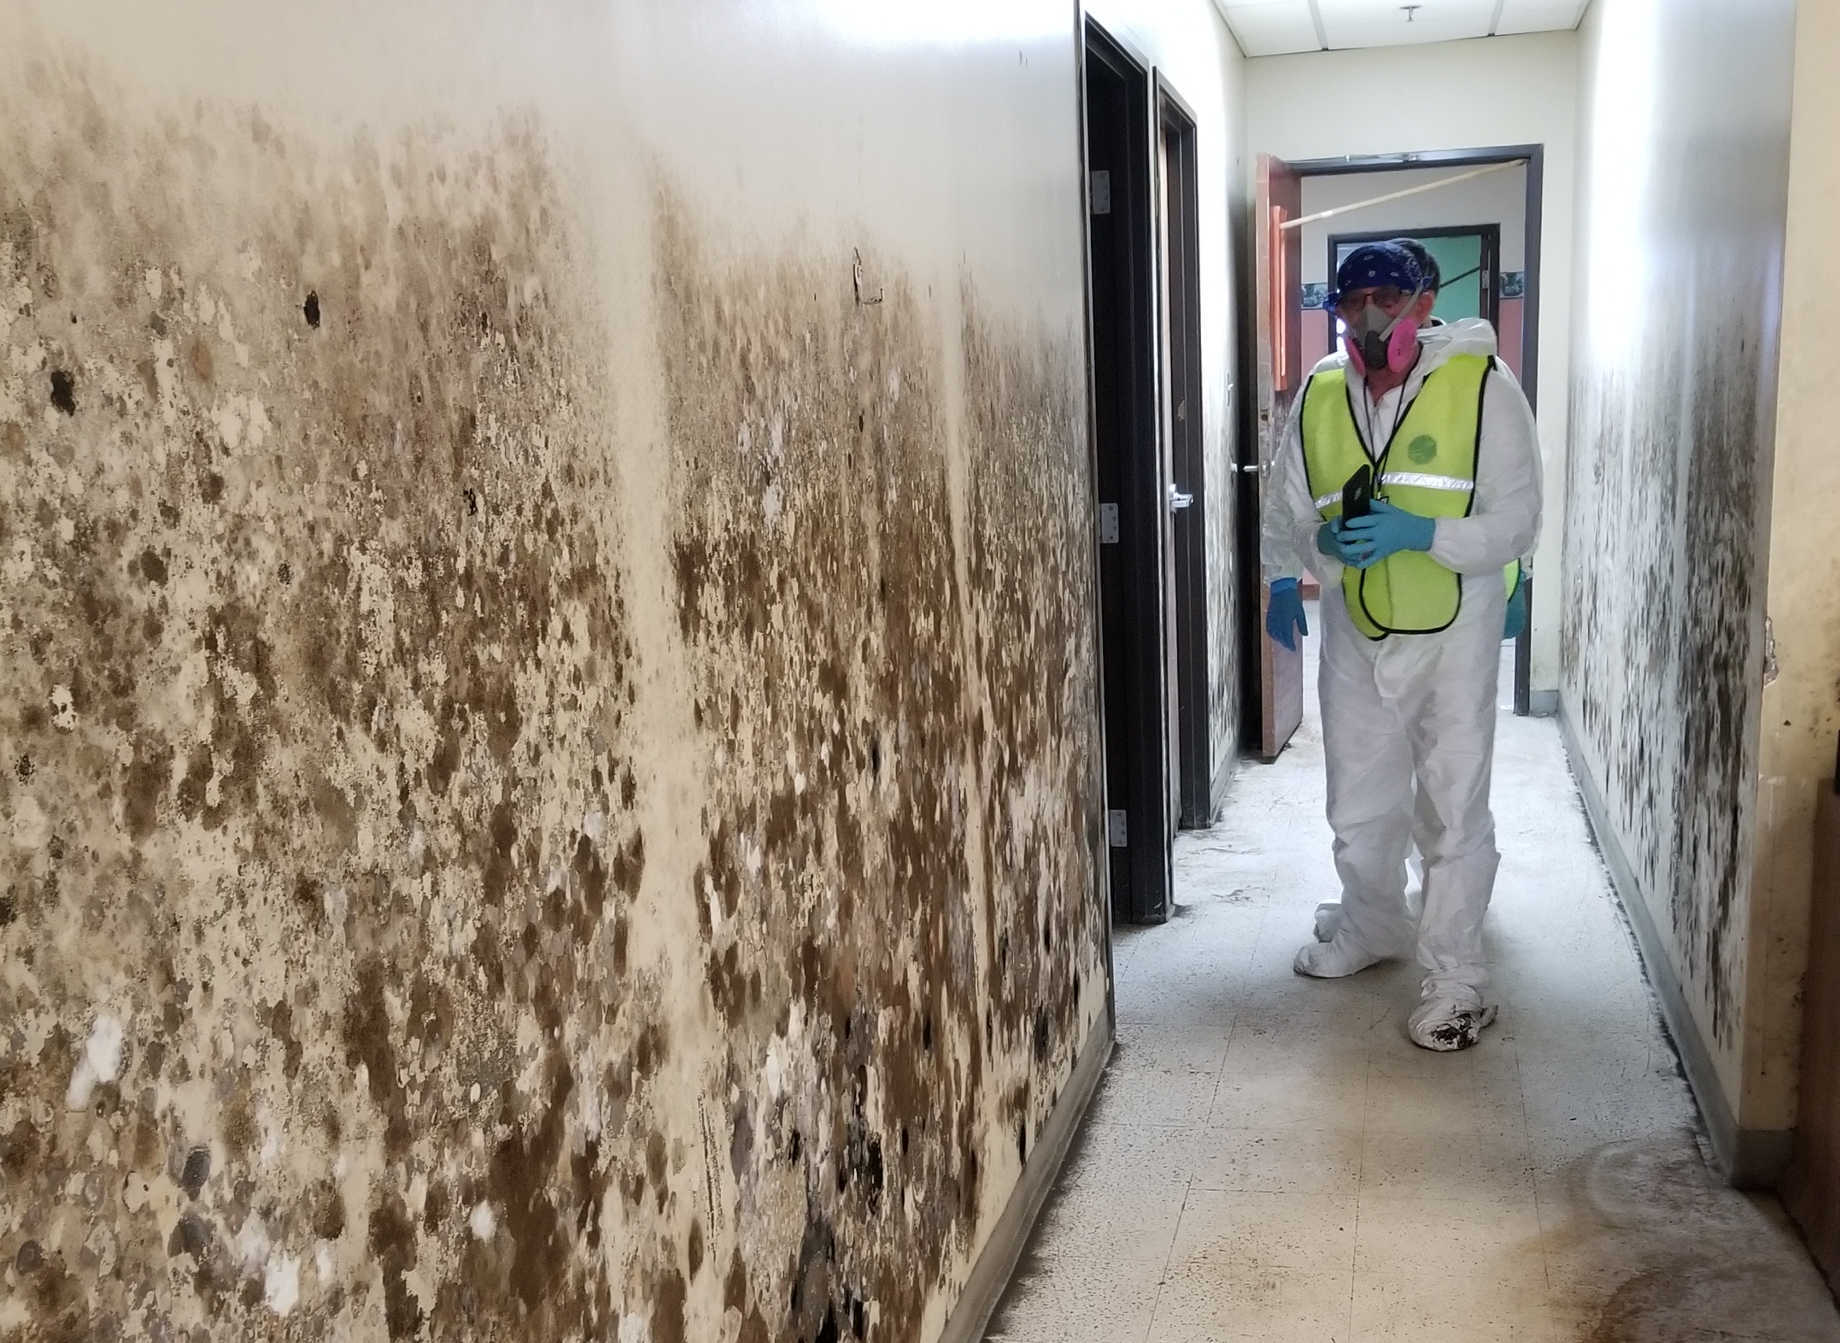 National Heritage Responder Robert Herskovitz visits a mold-infested institution in Puerto Rico following Hurricane Maria in 2017. Image courtesy of FAIC.